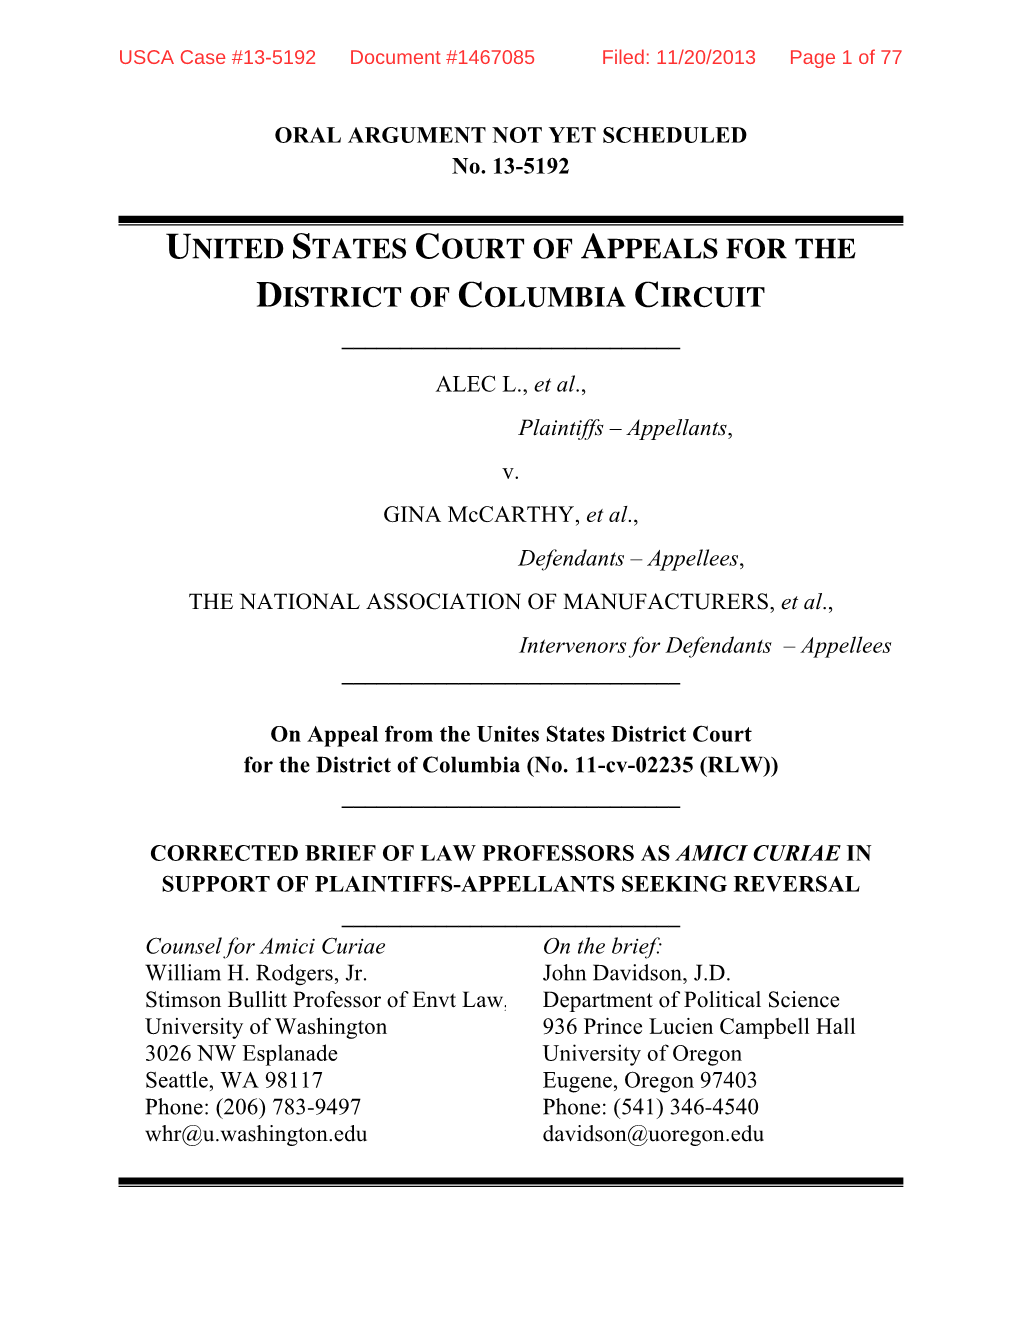 BRIEF of LAW PROFESSORS AS AMICI CURIAE in SUPPORT of PLAINTIFFS-APPELLANTS SEEKING REVERSAL ______Counsel for Amici Curiae on the Brief: William H